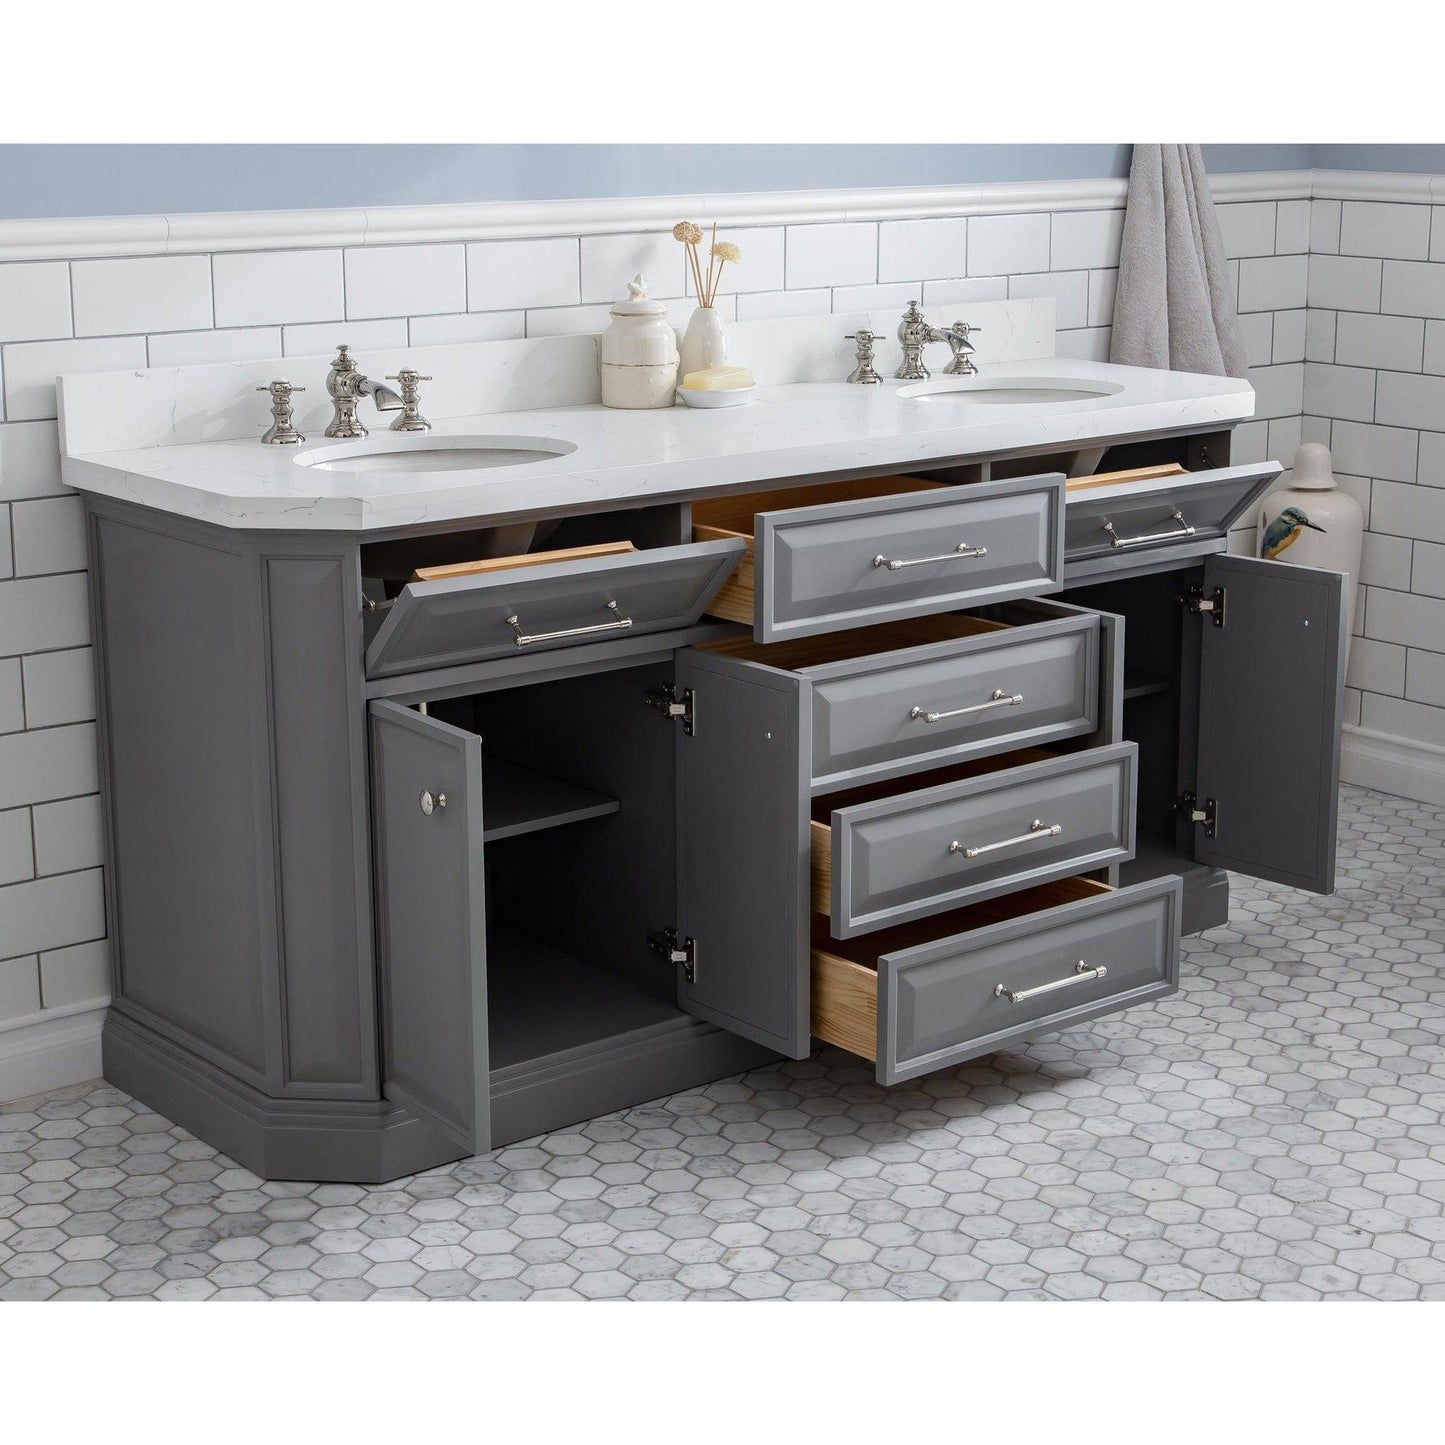 Water Creation Palace 72" Quartz Carrara Cashmere Grey Bathroom Vanity Set With Hardware, Mirror in Polished Nickel (PVD) Finish